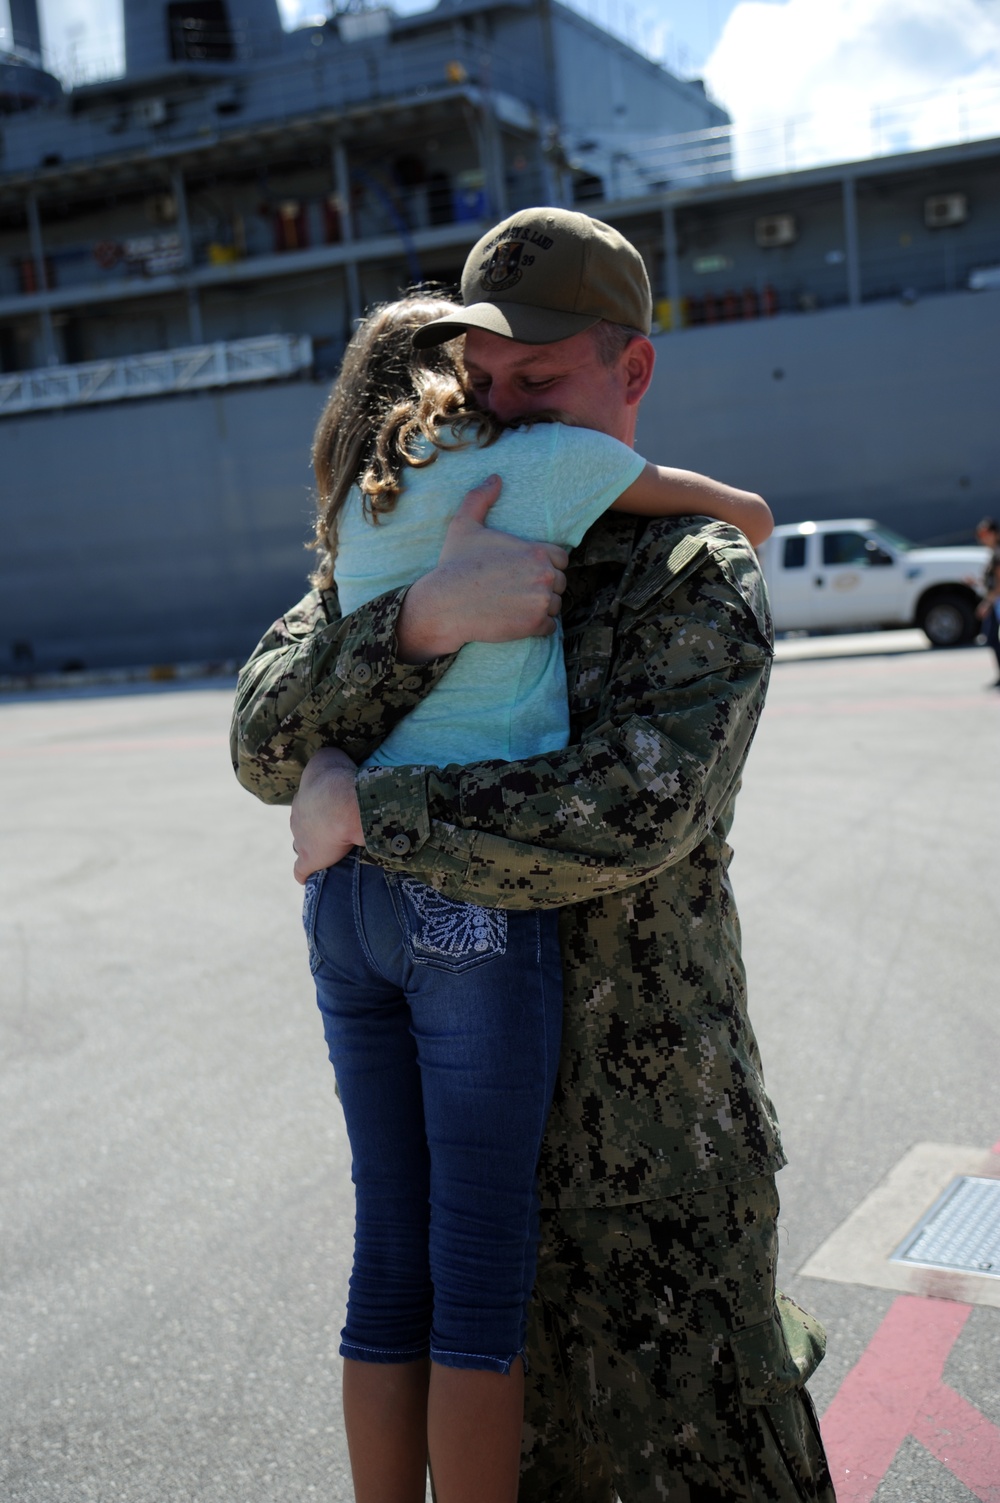 Chief Hull Maintenance Technician Leonard Roach, assigned to the submarine tender USS Emory S. Land (AS 39), hugs his daughter during a homecoming gathering